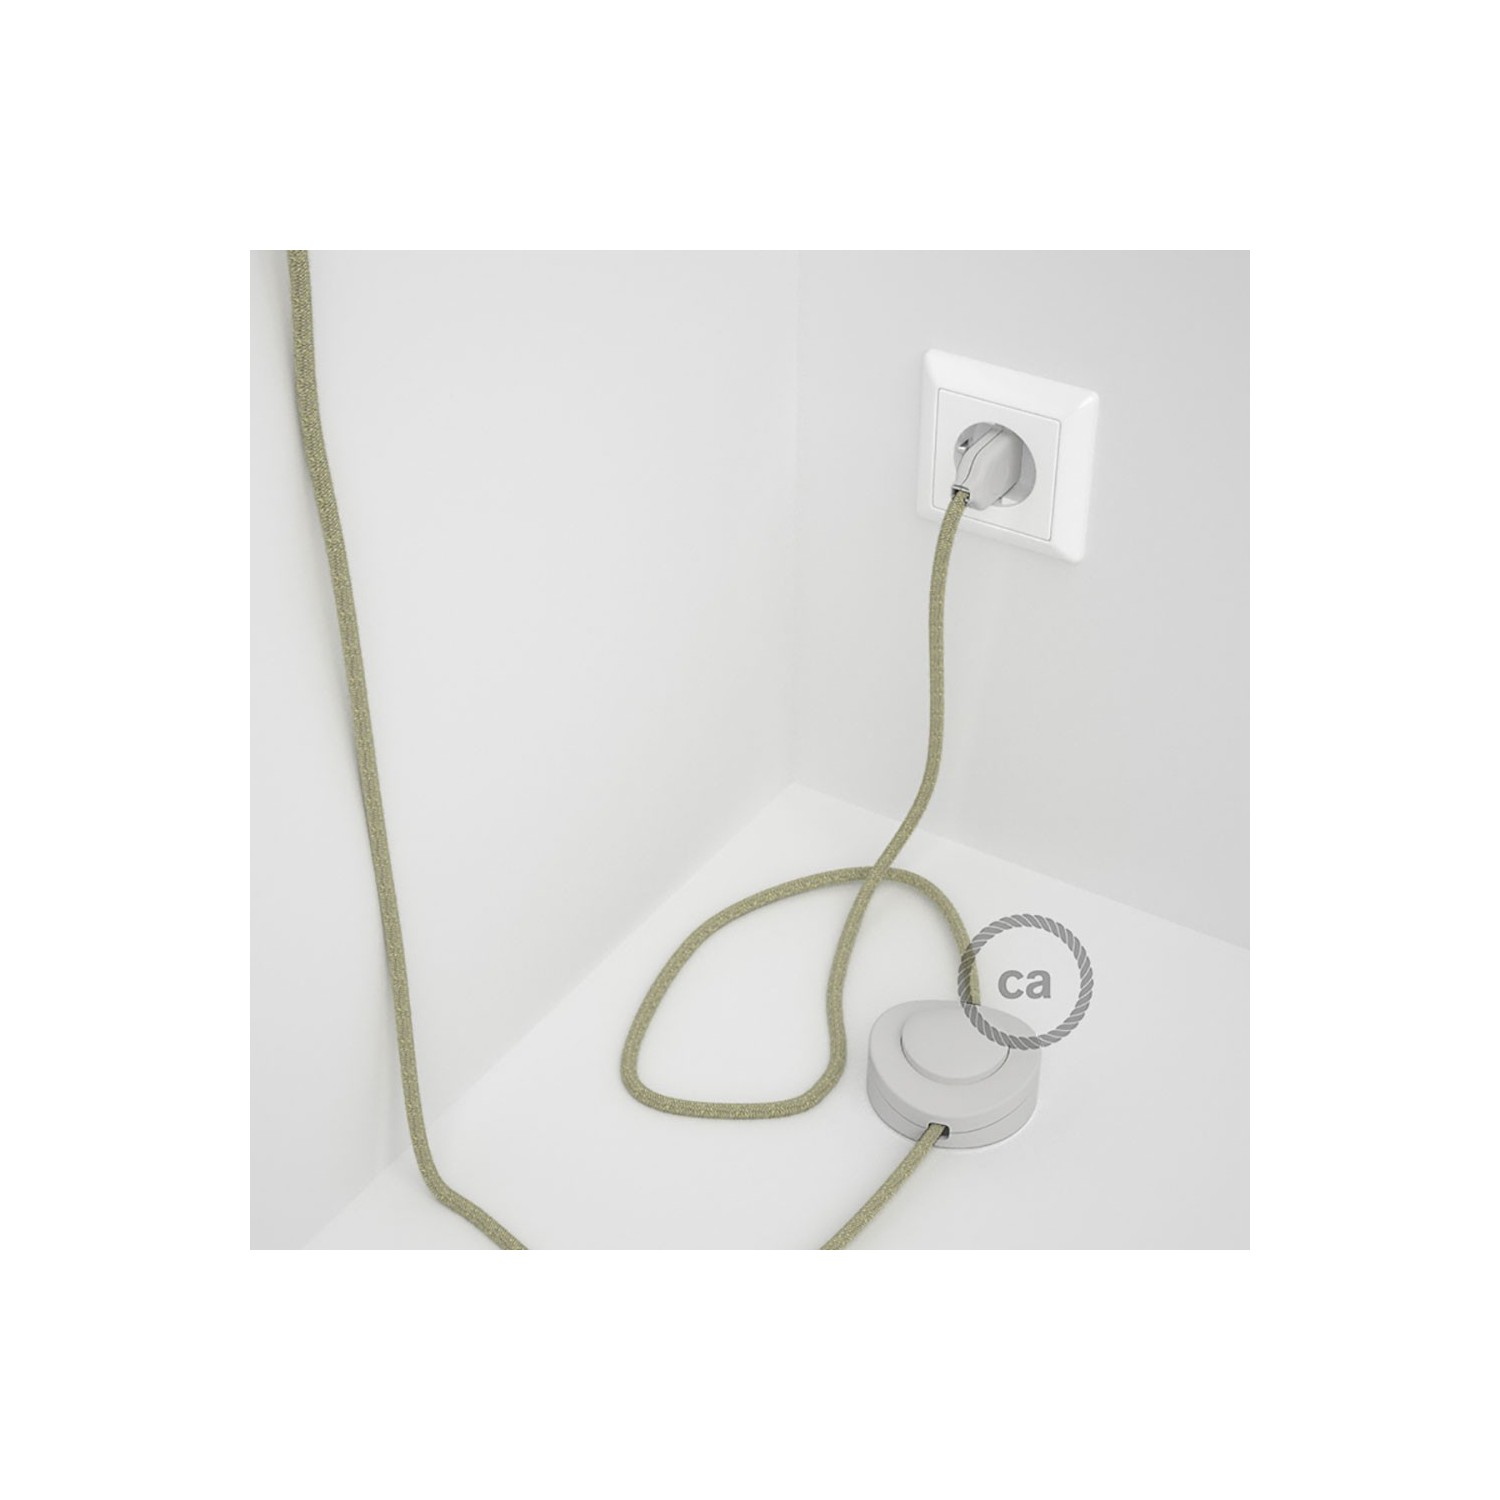 Wiring Pedestal, RN01 Neutral Natural Linen 3 m. Choose the colour of the switch and plug.